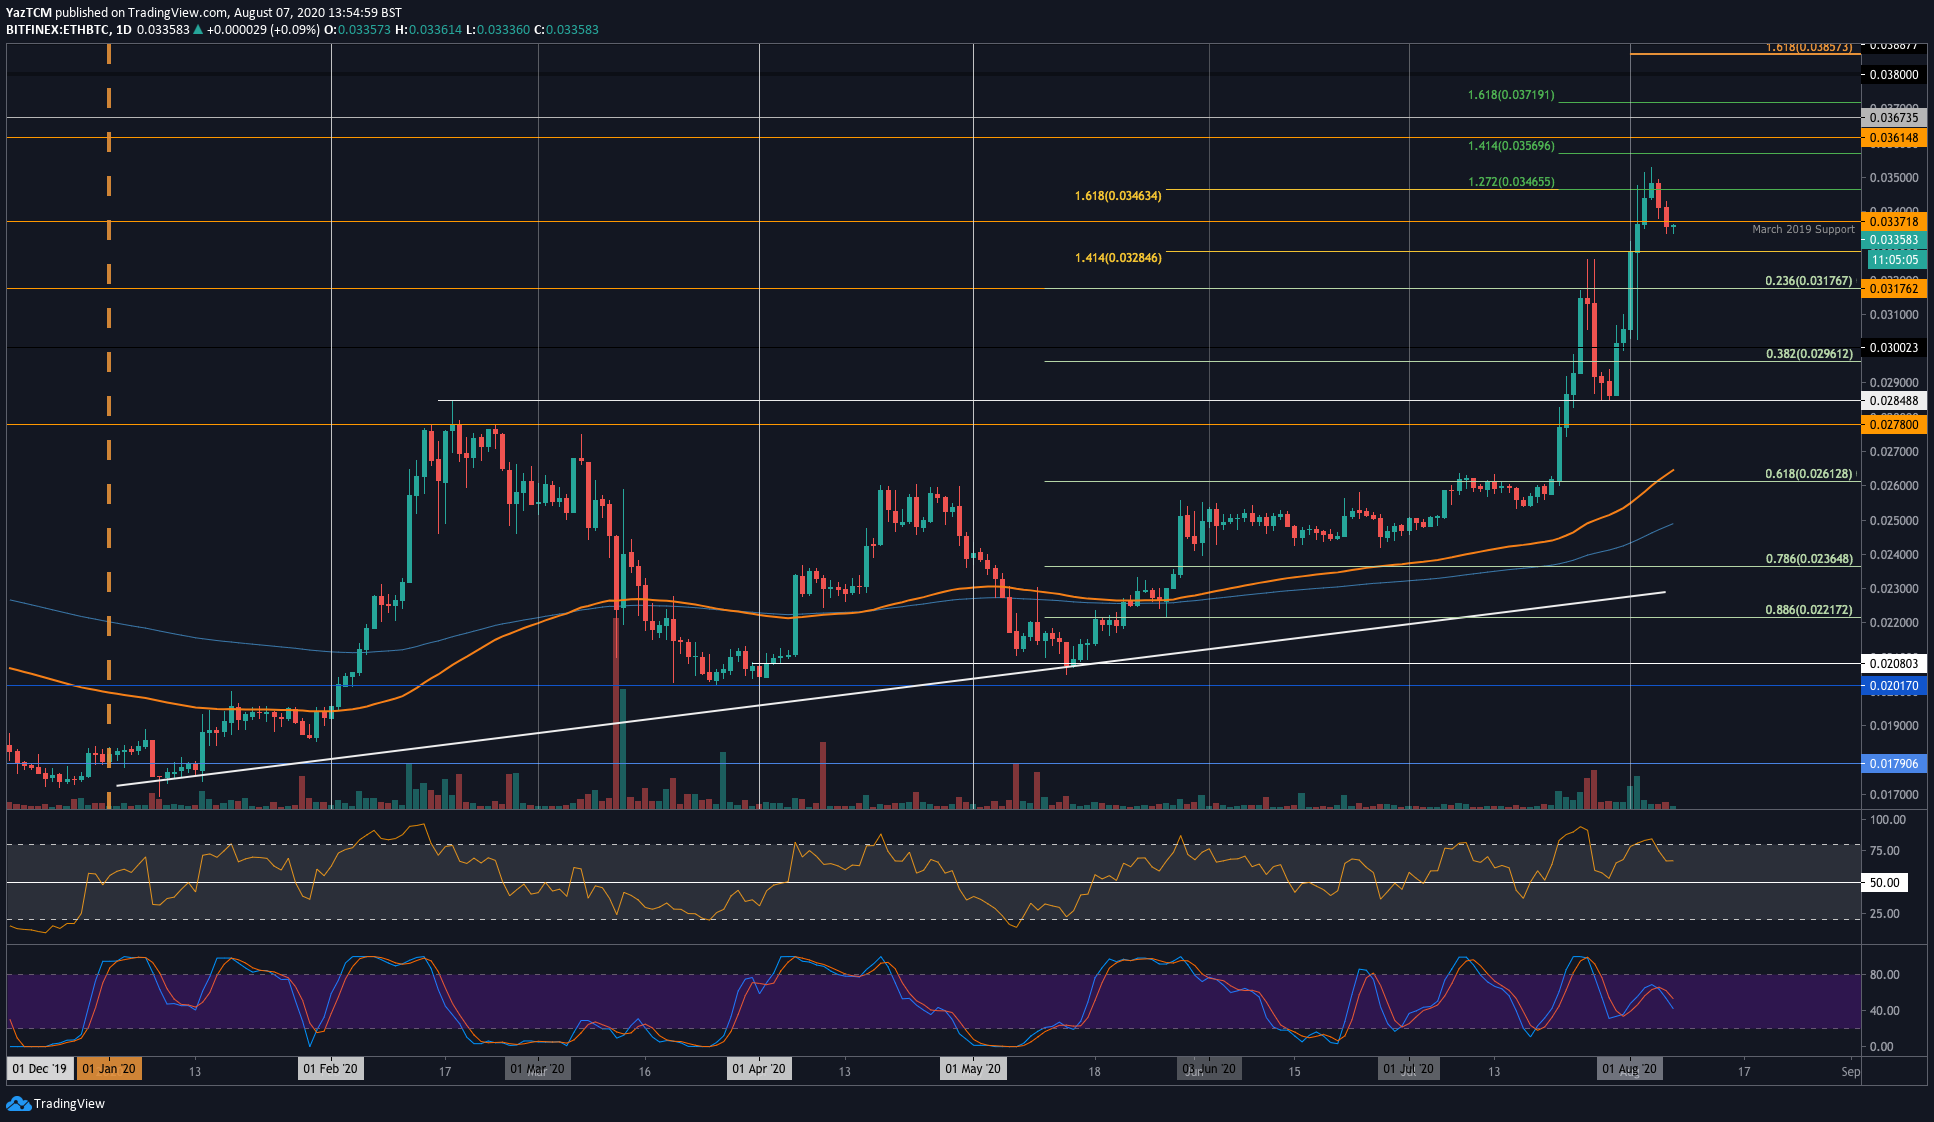 Crypto Price Analysis & Overview August 7th: Bitcoin, Ethereum, Ripple, Tezos, and Elrond